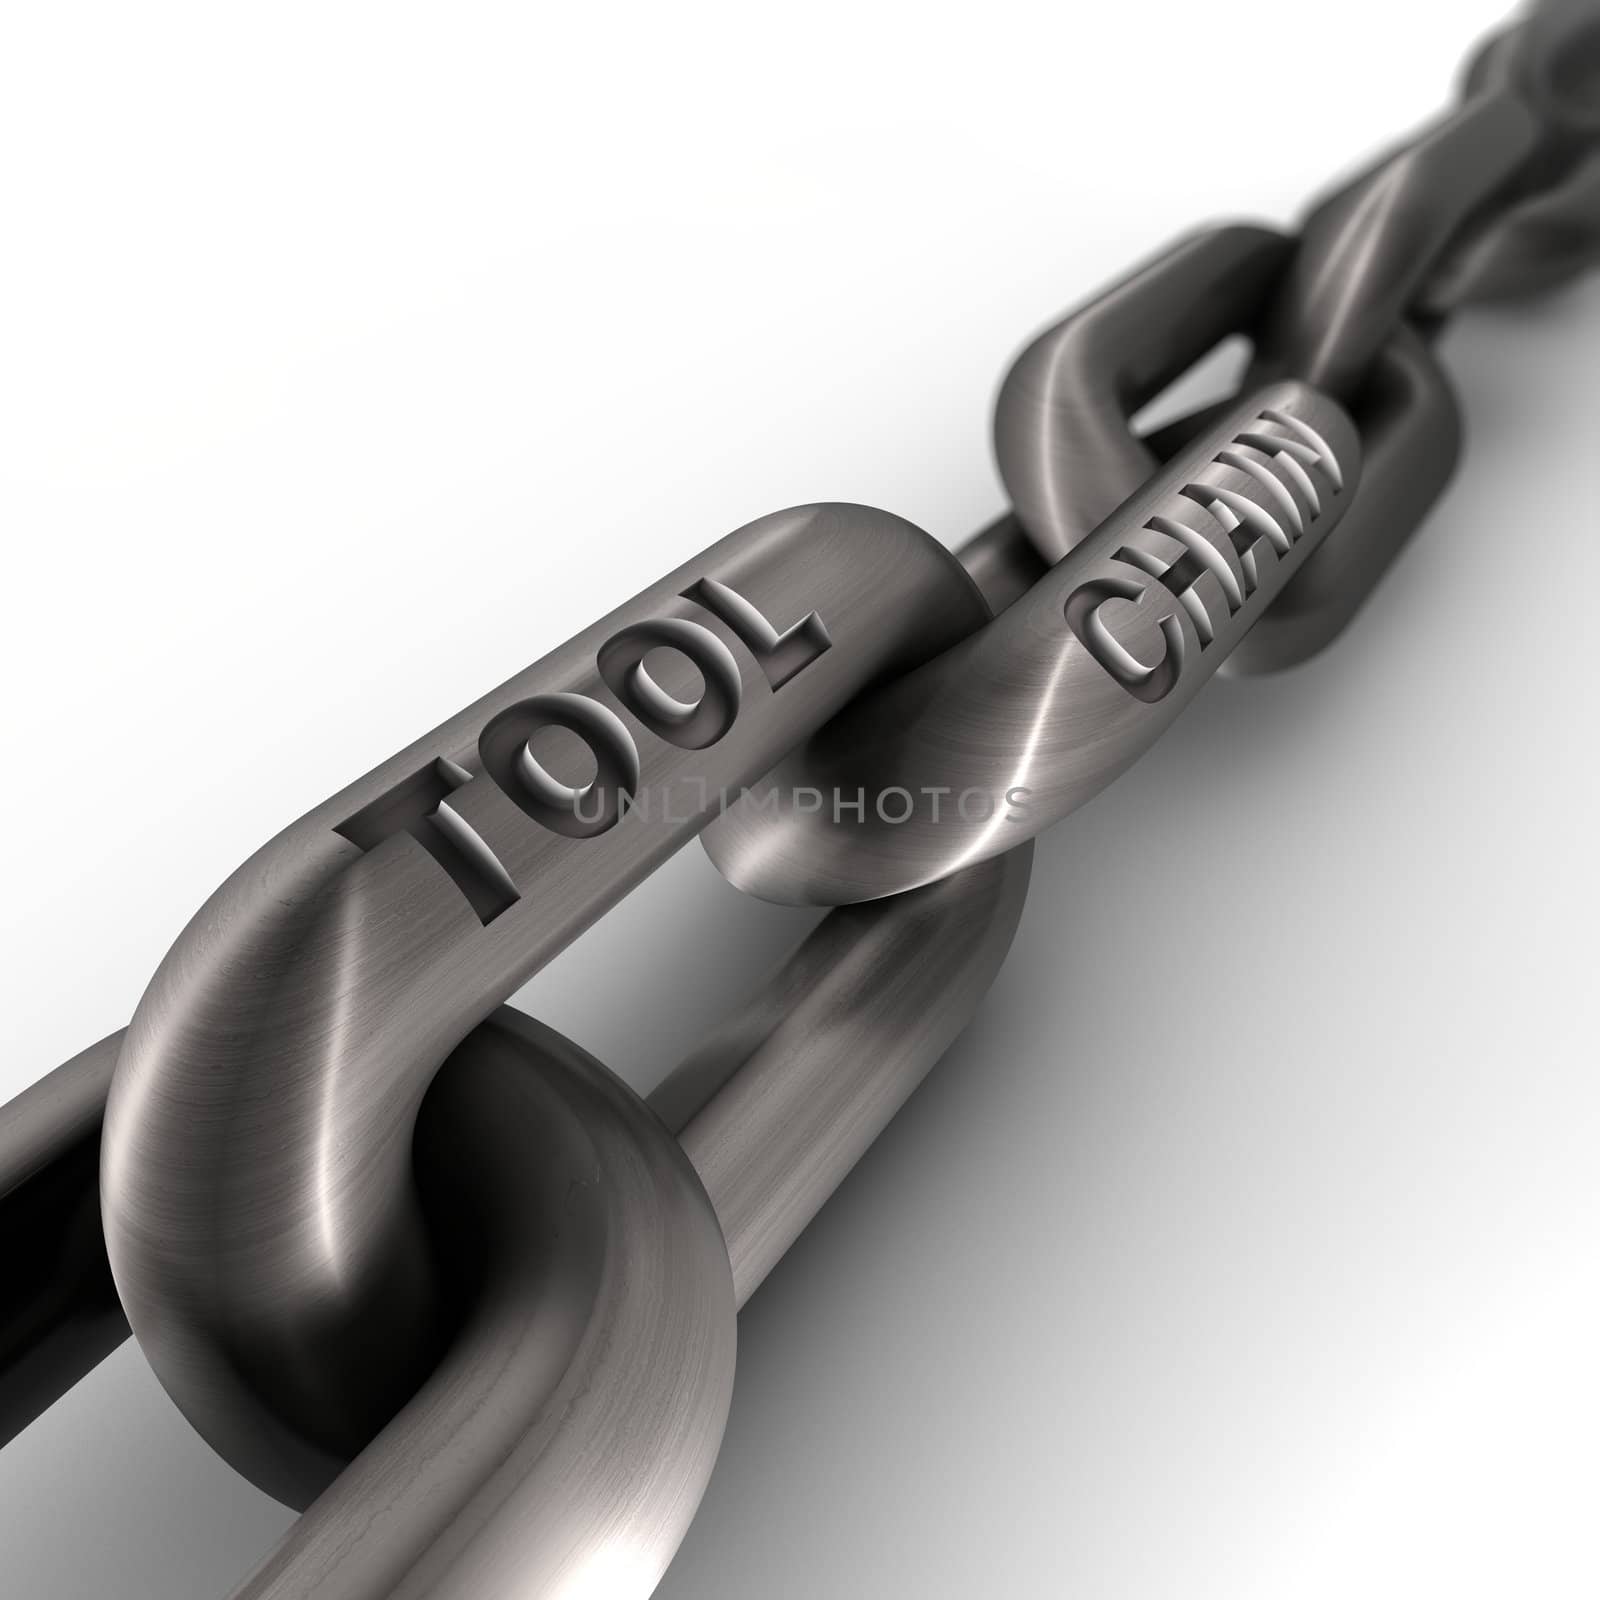 A tool chain is a set of programming tools used to create a software product